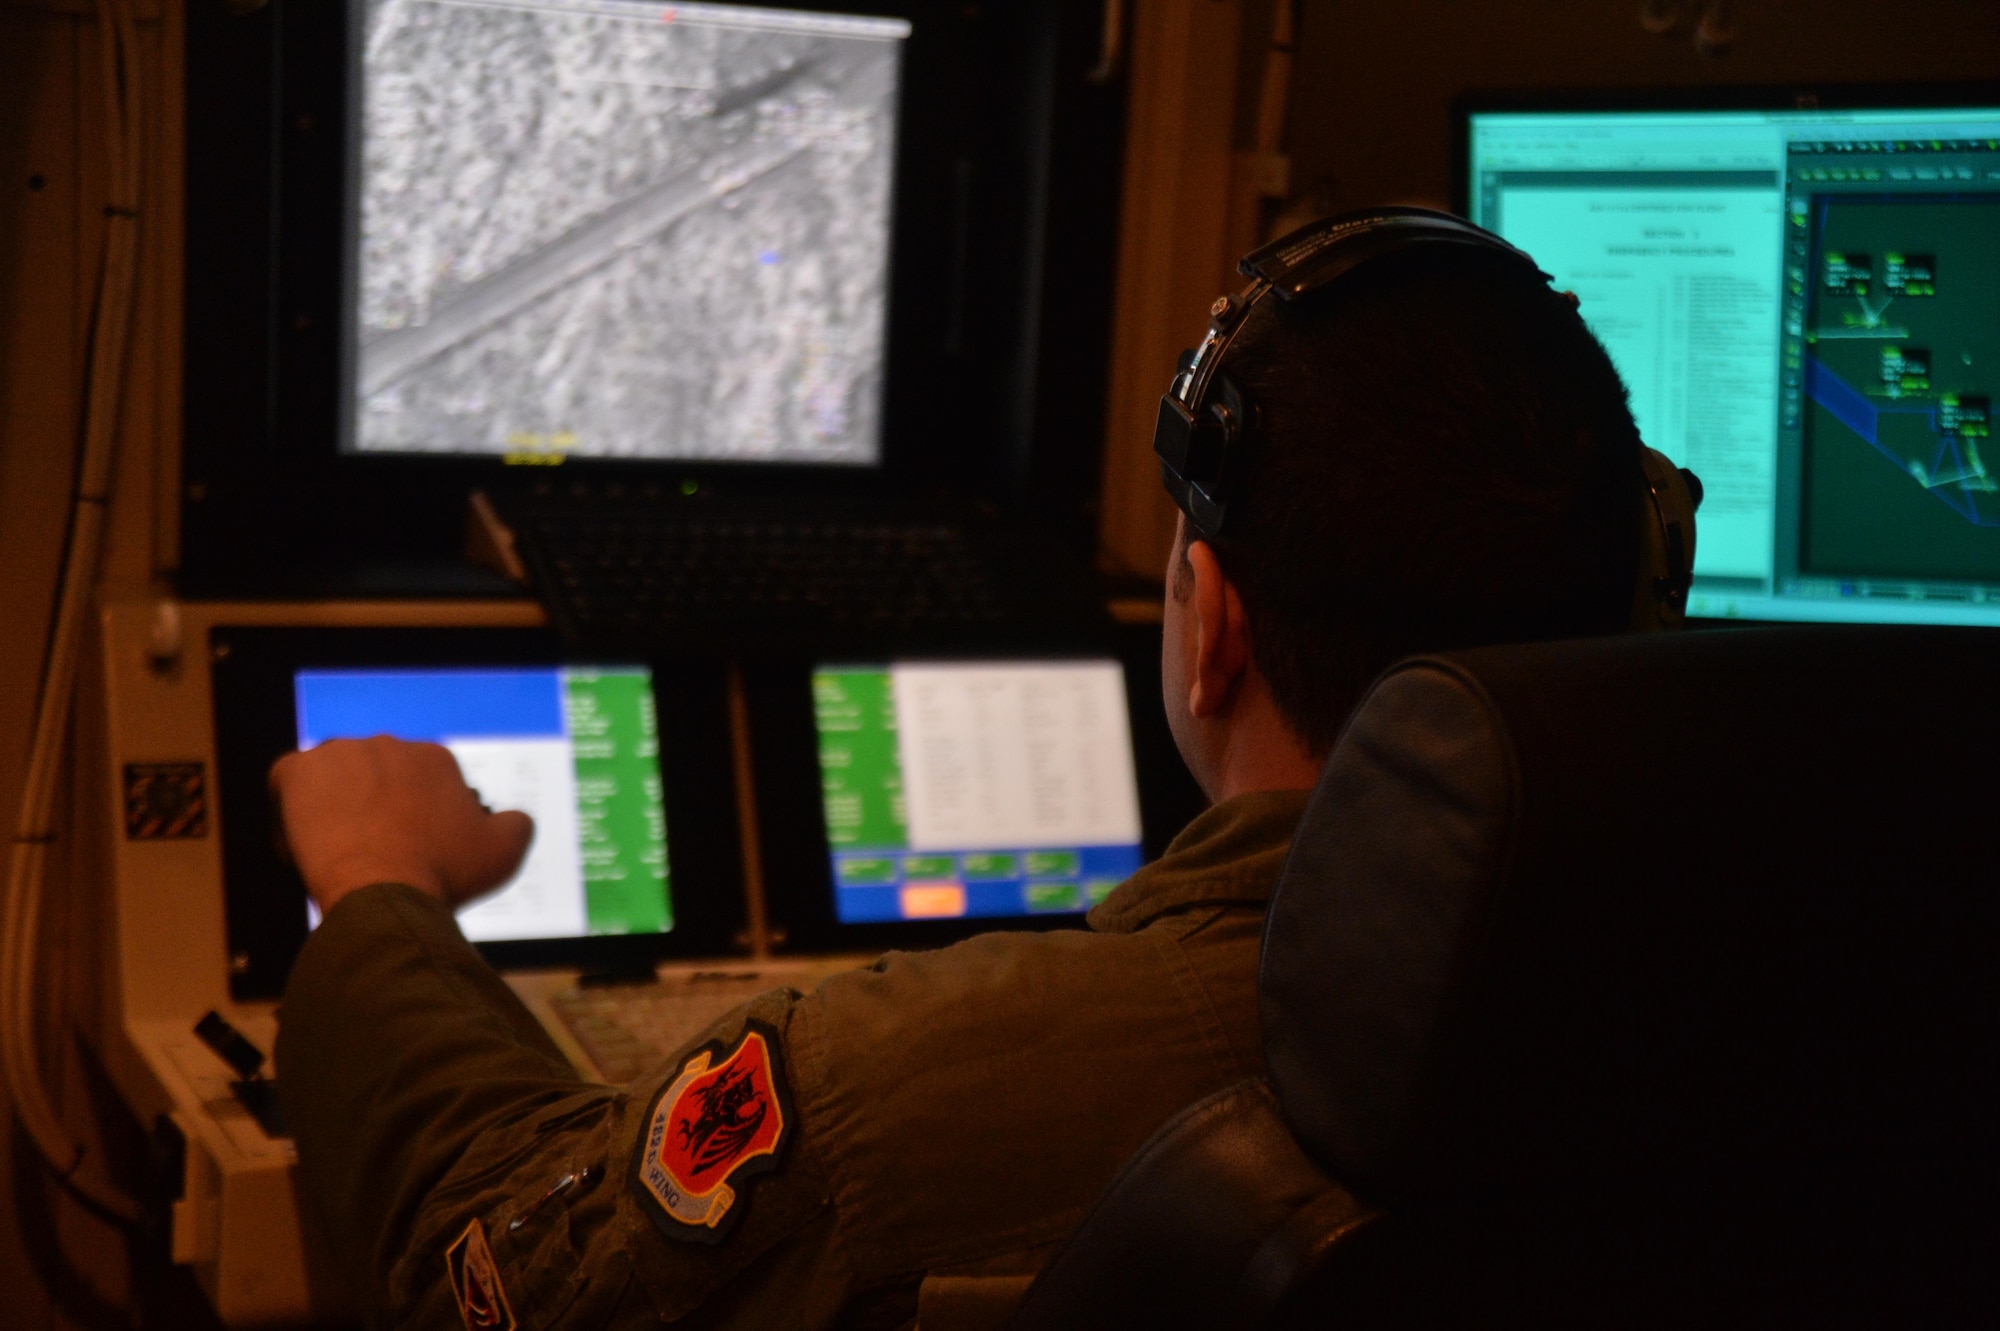 A sensor operator assigned to the 11th Attack Squadron trains in support of the launch and recovery missions March 2, 2017, at Creech Air Force Base, Nev. In addition to setting the standard of LRE training for MQ-1s and MQ-9s in the Air Force, the 11th also supports exercises involving these aircraft at the Nevada Test and Training Range. Exercises such as Red Flag, Green Flag and other advanced aerial combat training scenarios are made possible by the combined efforts of aircrews trained by the 11th ATKS FTU. (U.S. Air Force photo/Airman 1st Class Kristan Campbell)